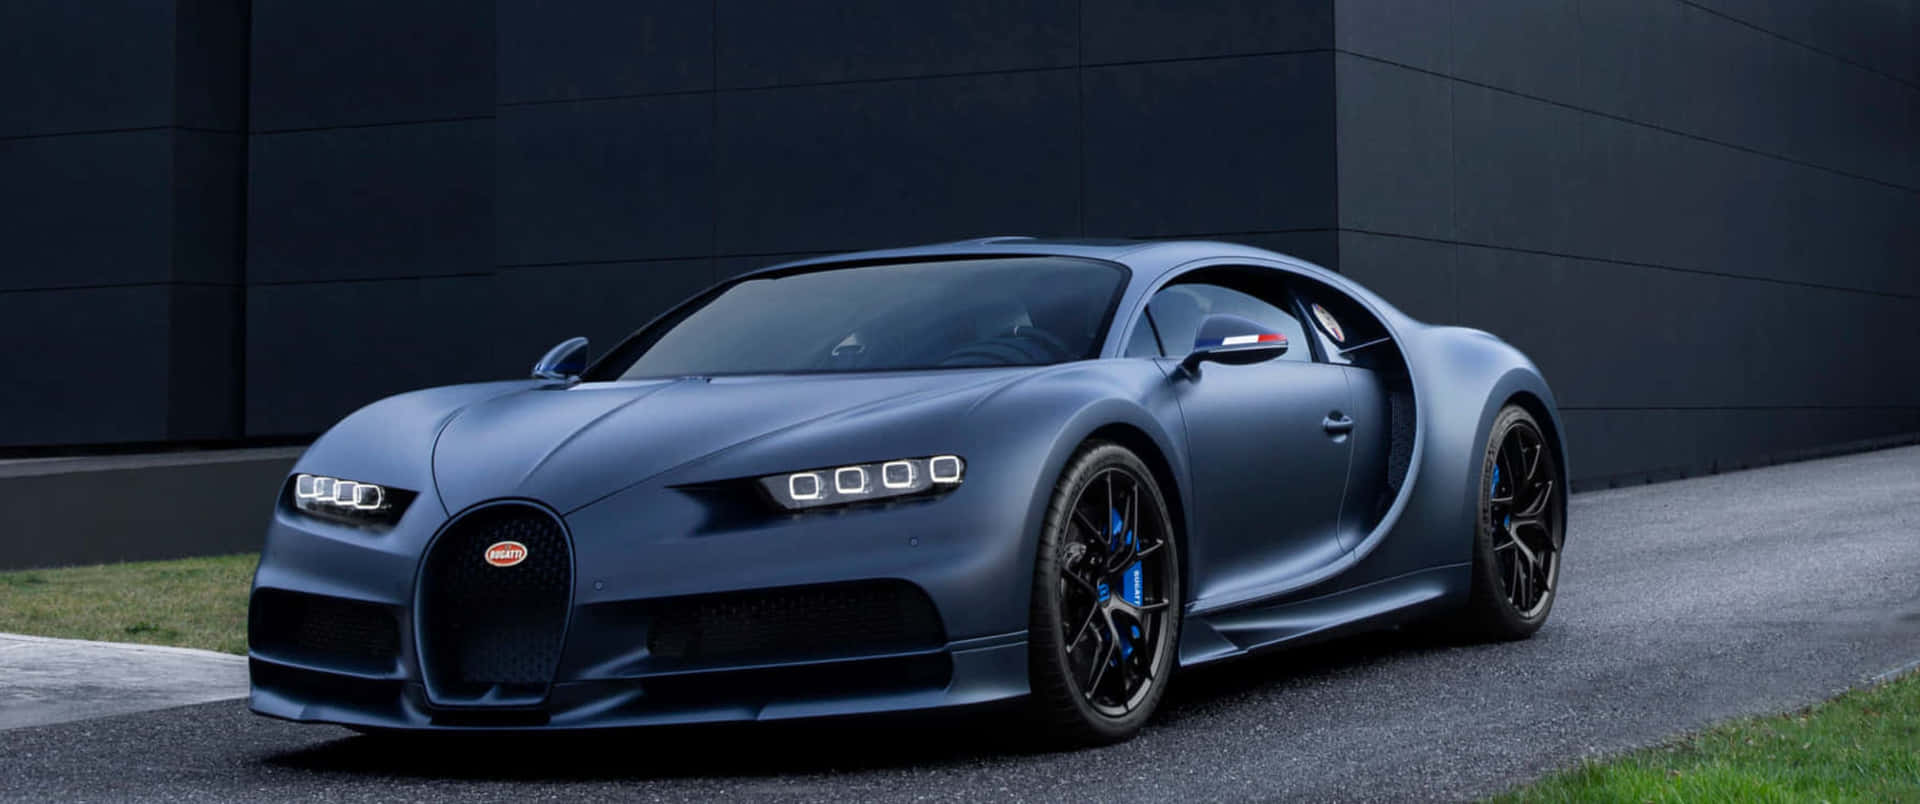 A sleek angle of a Bugatti showcased at a motorsport event.